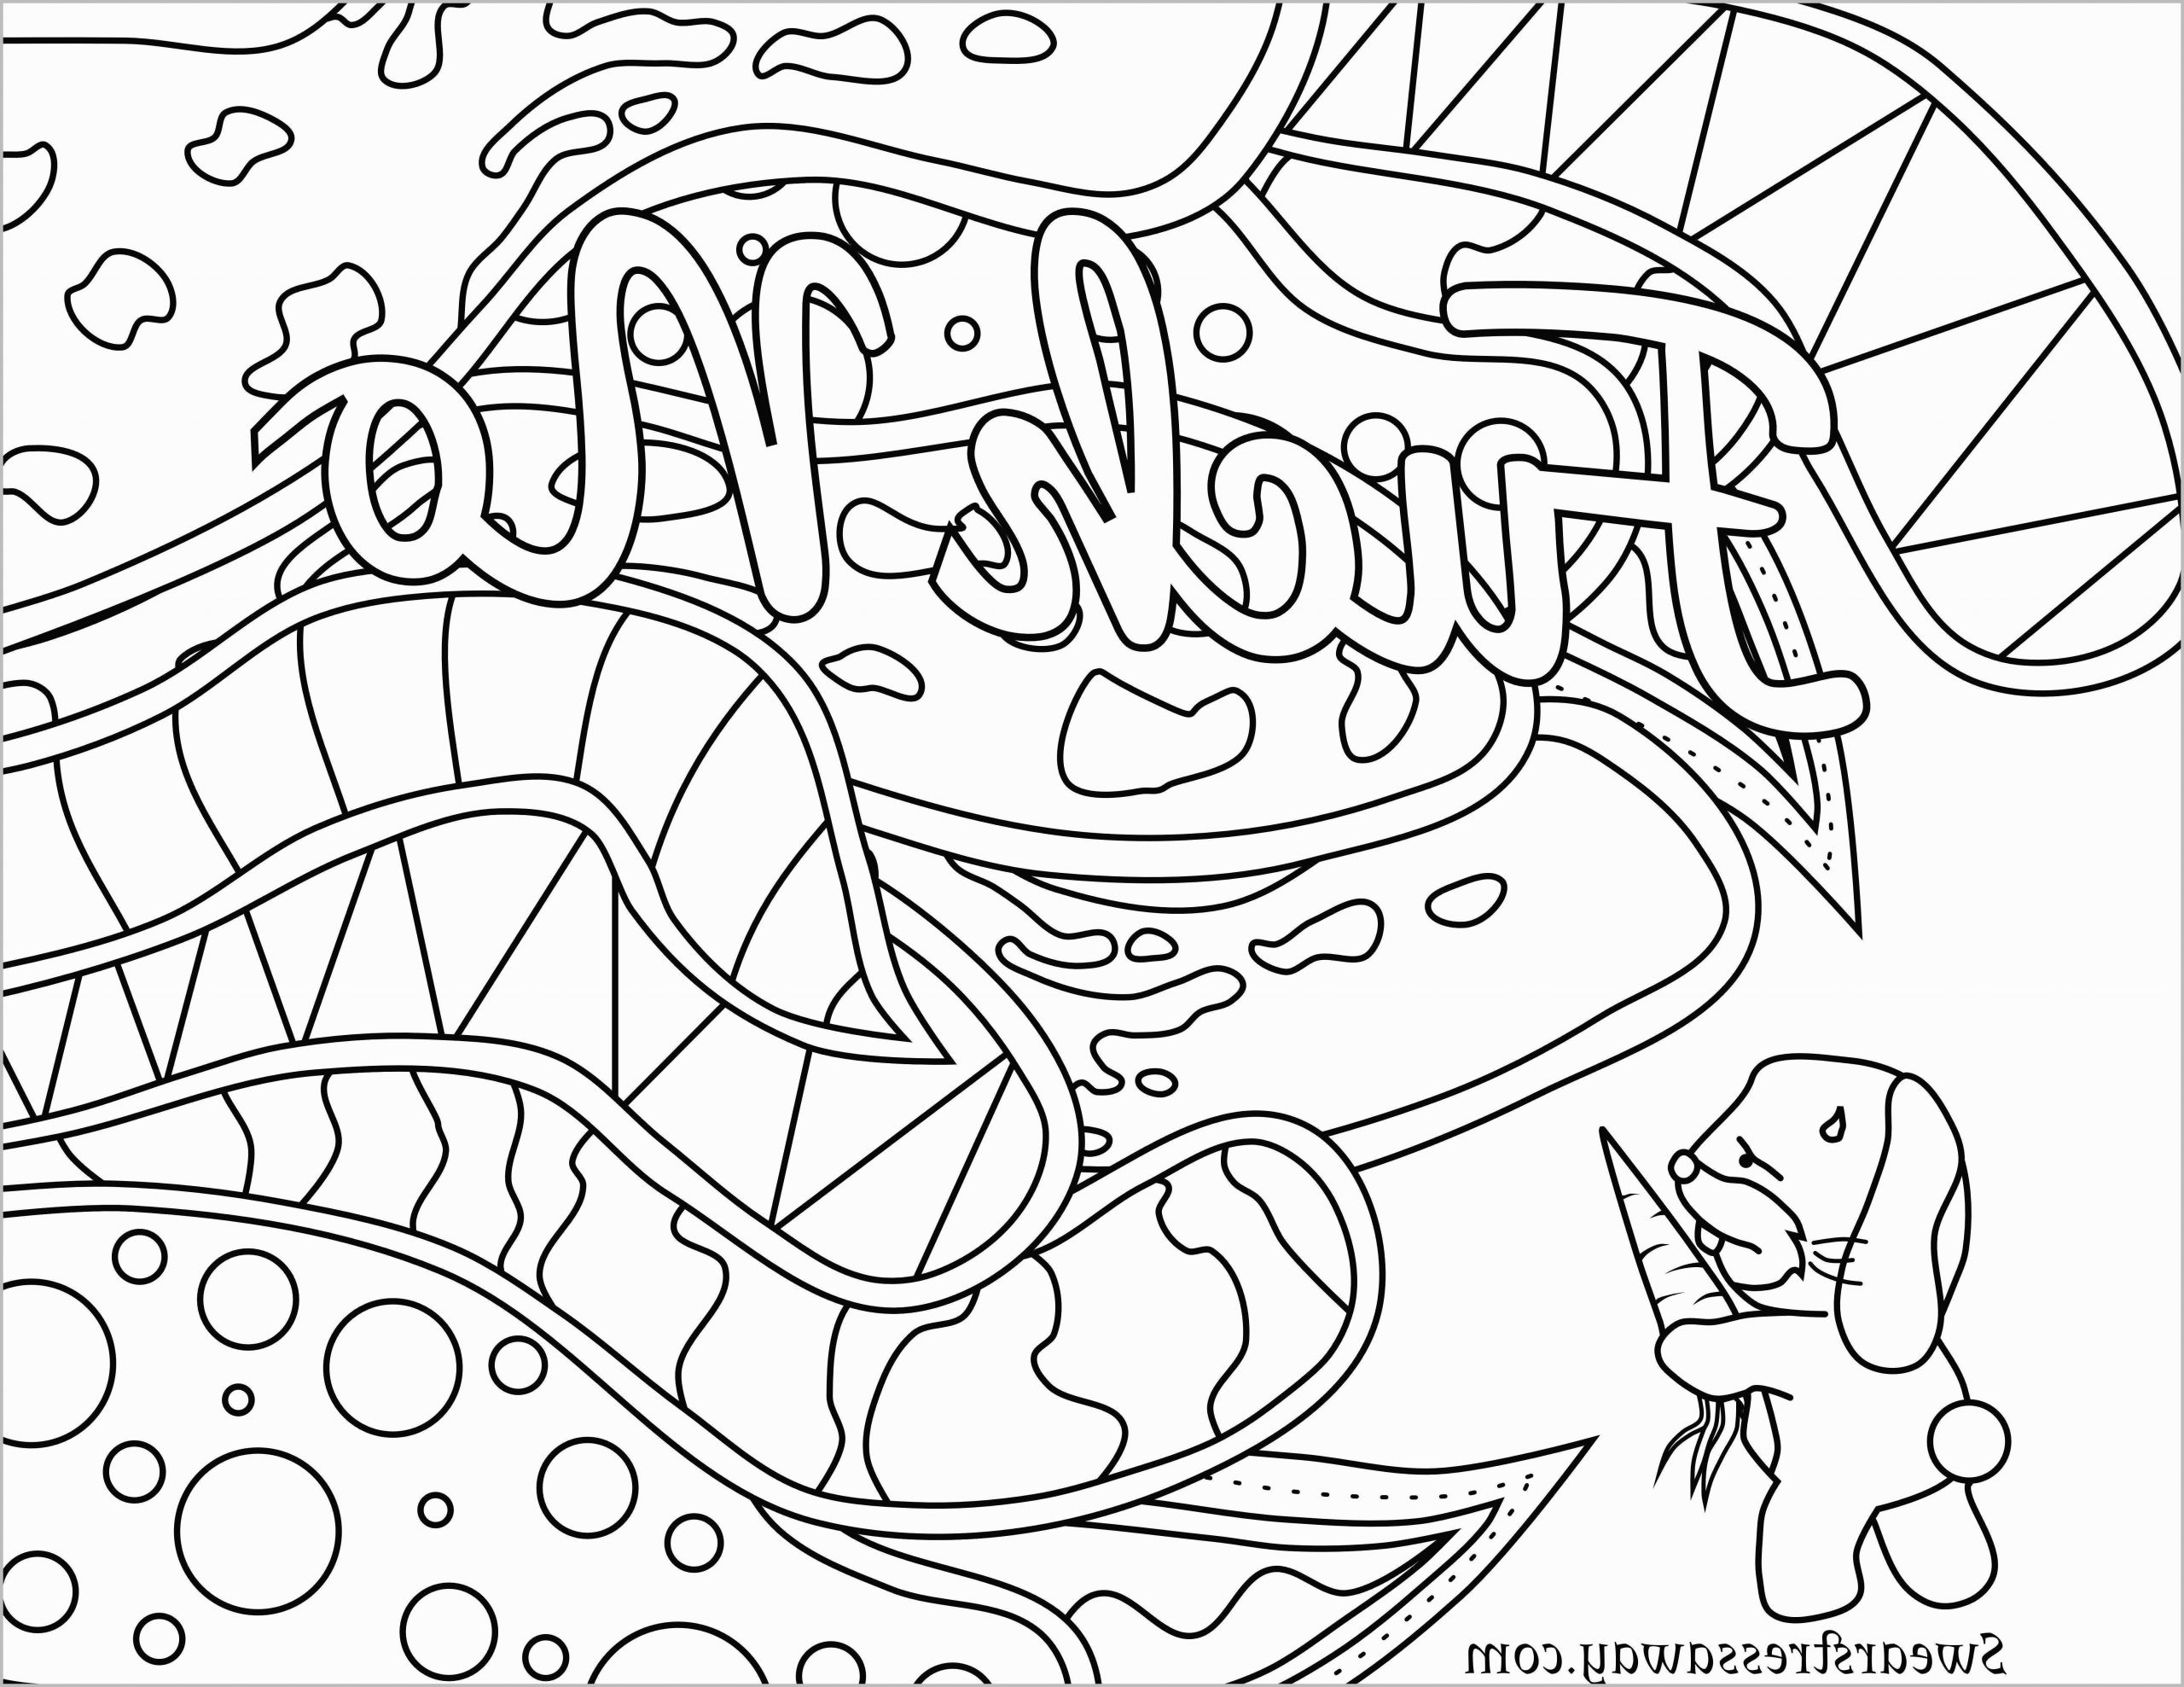 Download Coloring Pages Swear Word Coloring Pages For Adults Best Of 25 Beautiful Cuss Words Coloring Page Swear Word Coloring Pages For Adults Affiliateprogrambook Com Coloring Home